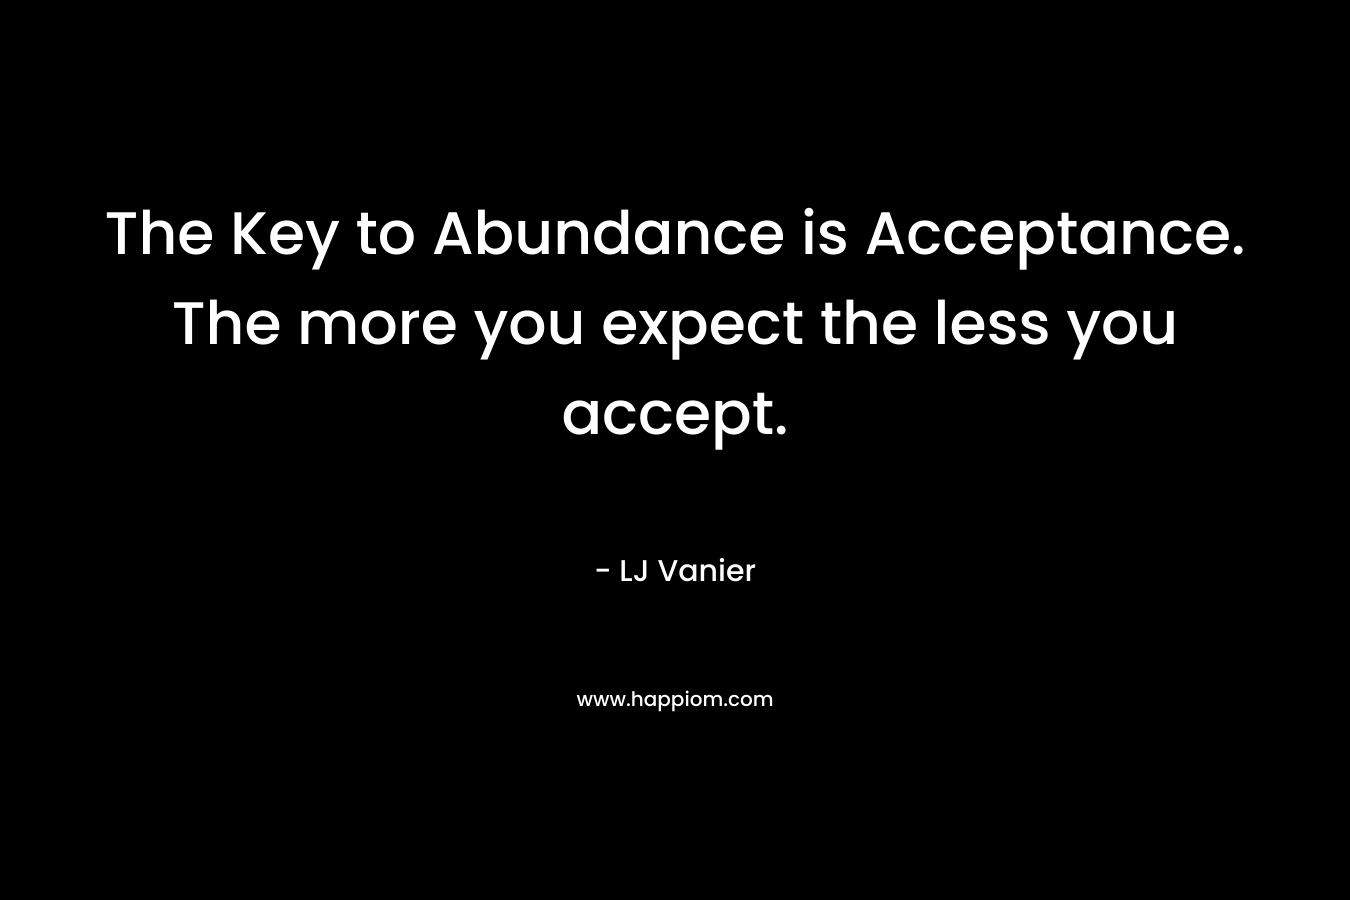 The Key to Abundance is Acceptance. The more you expect the less you accept.